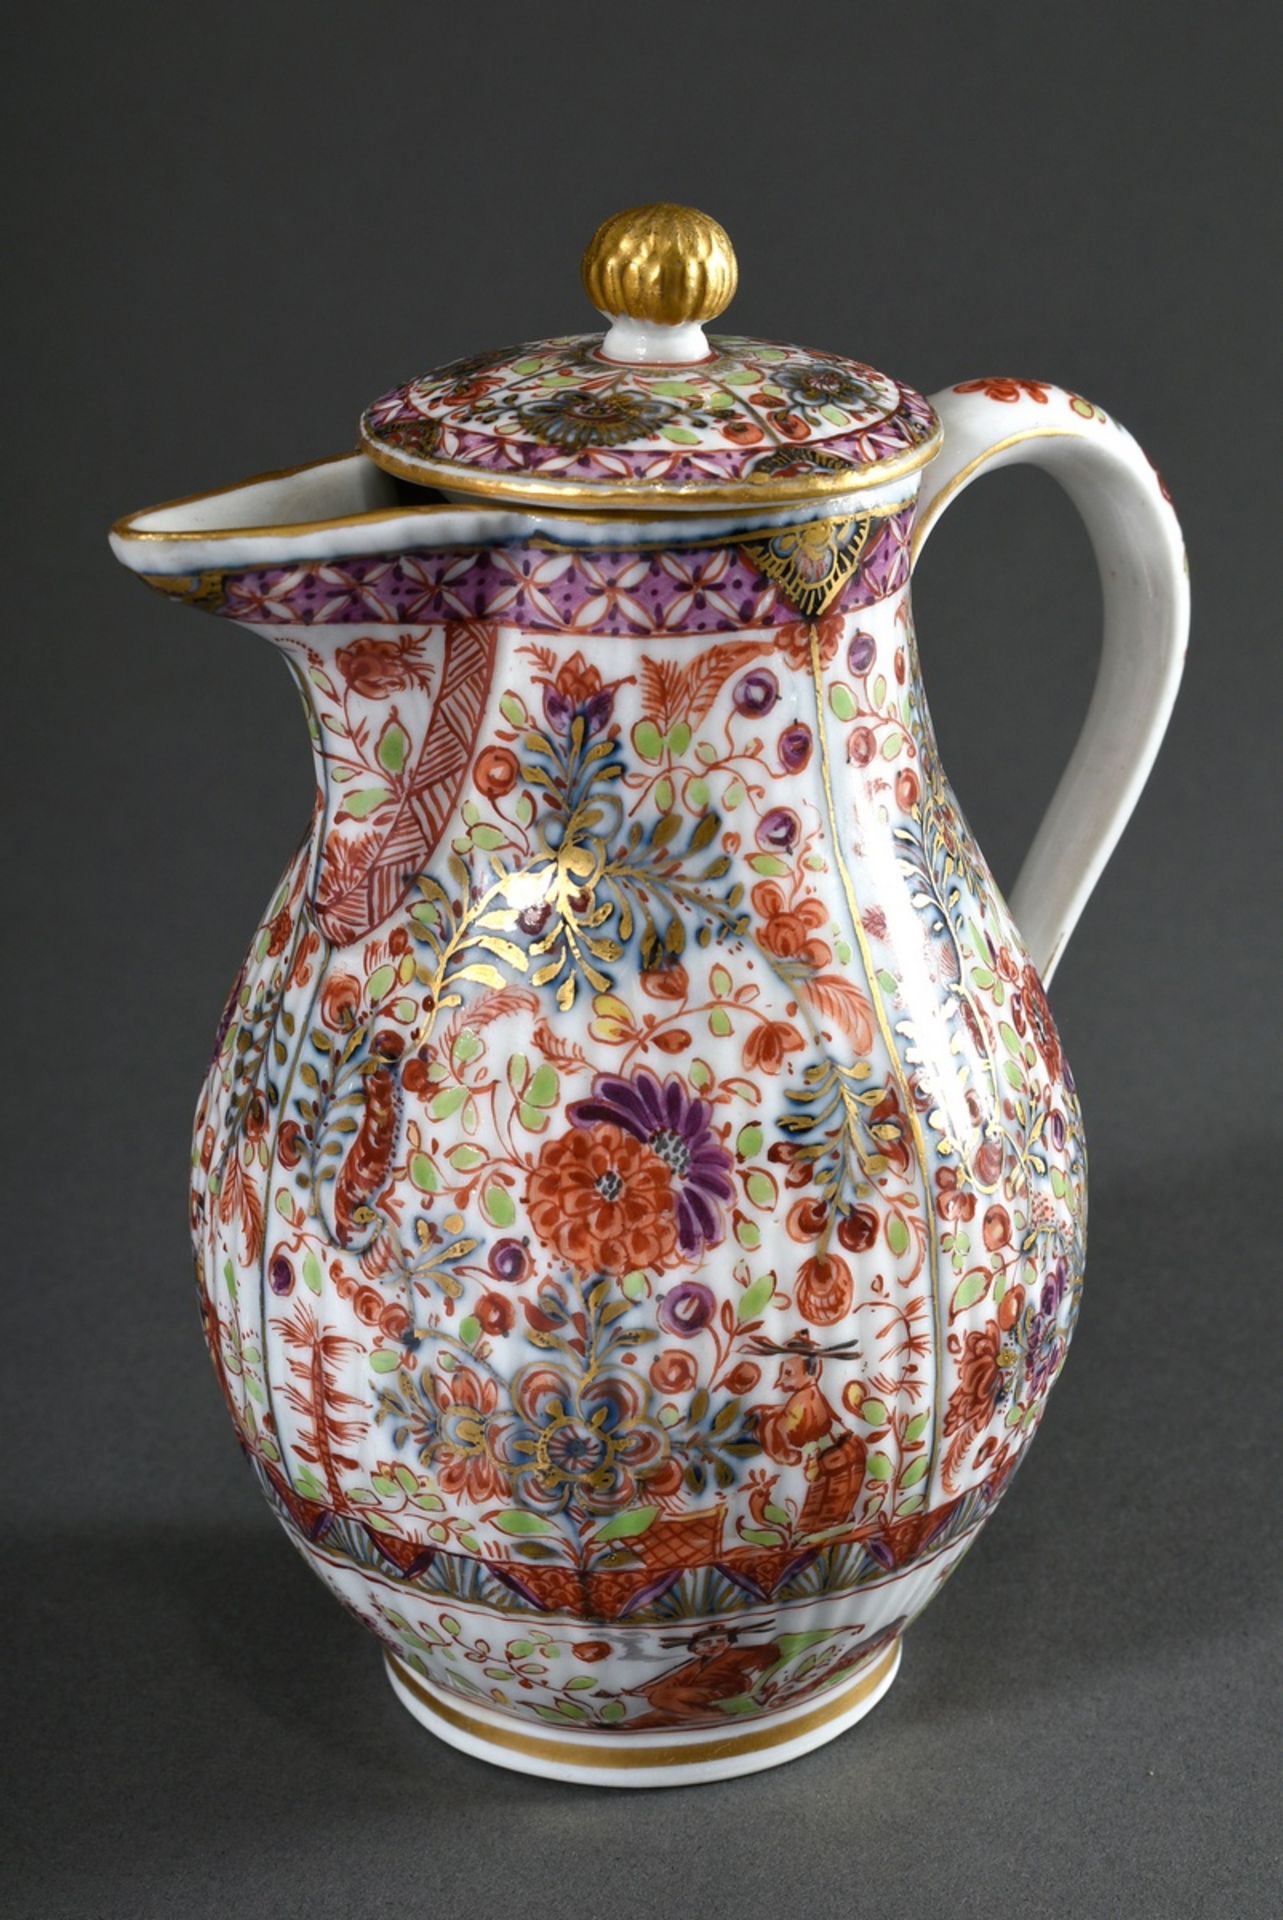 Small antique Meissen coffee-pot with opulent polychrome decoration "Indian Flower Painting" over b